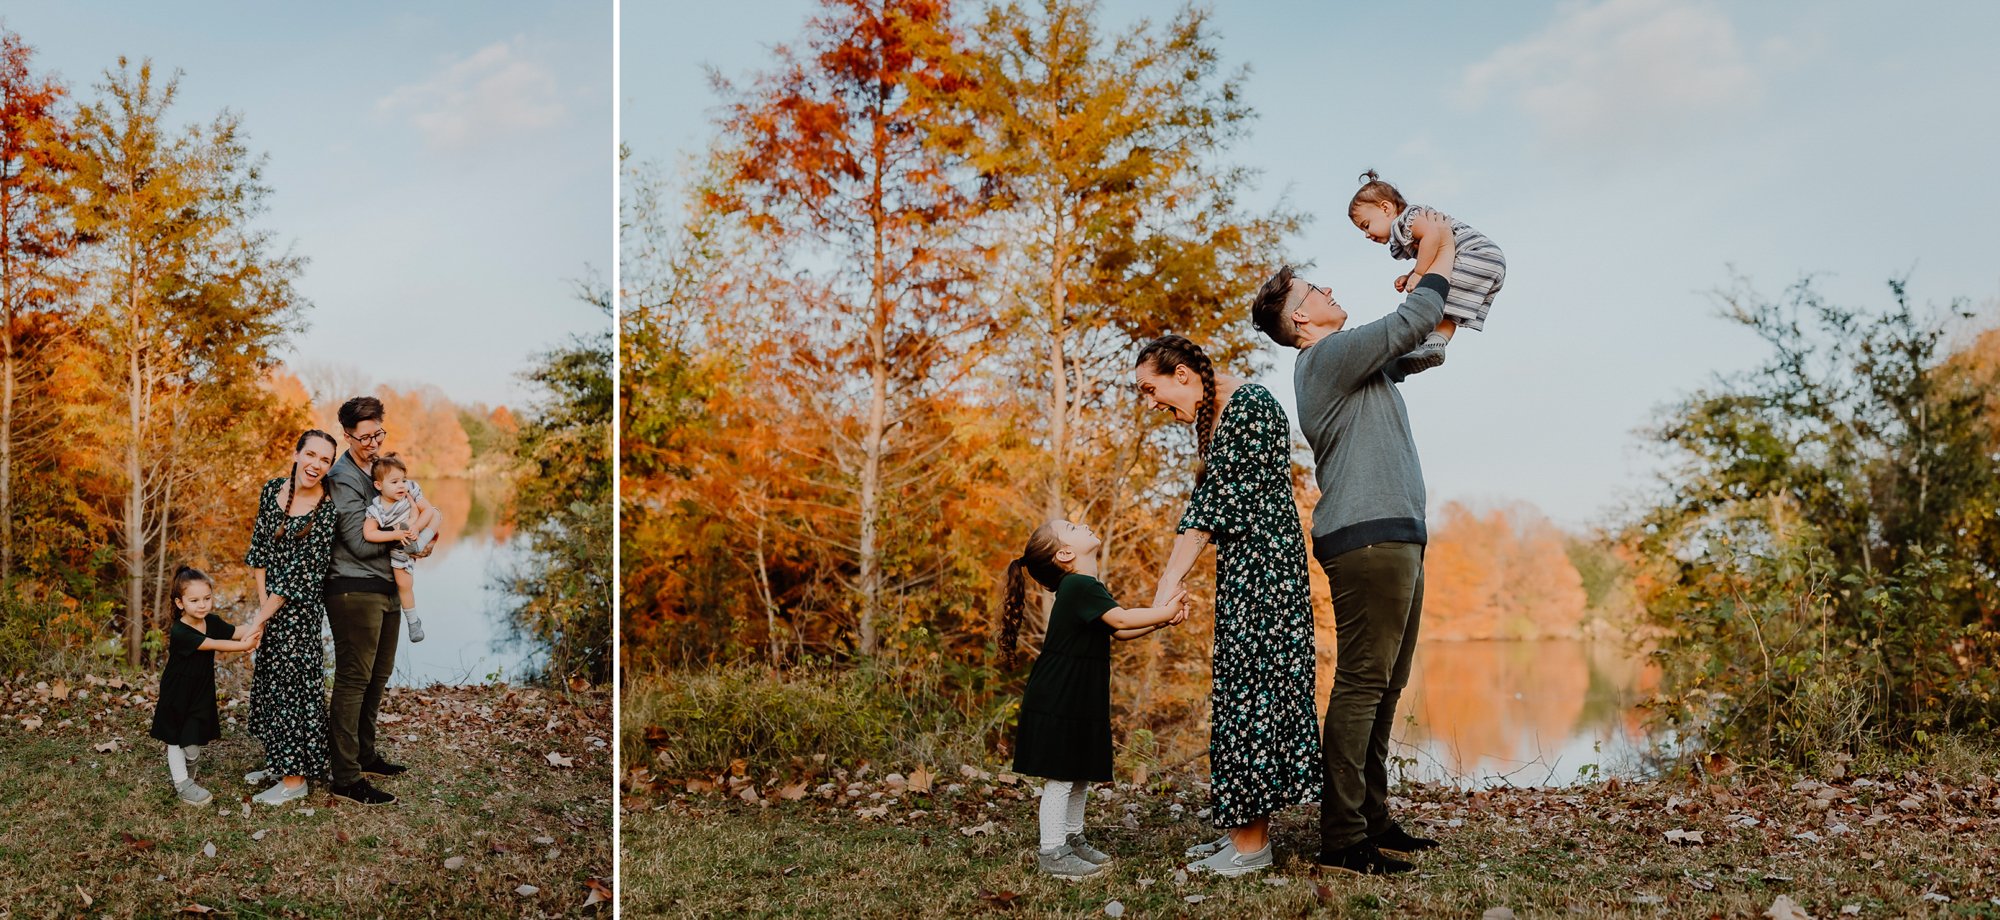 family photos in Austin during fall holiday